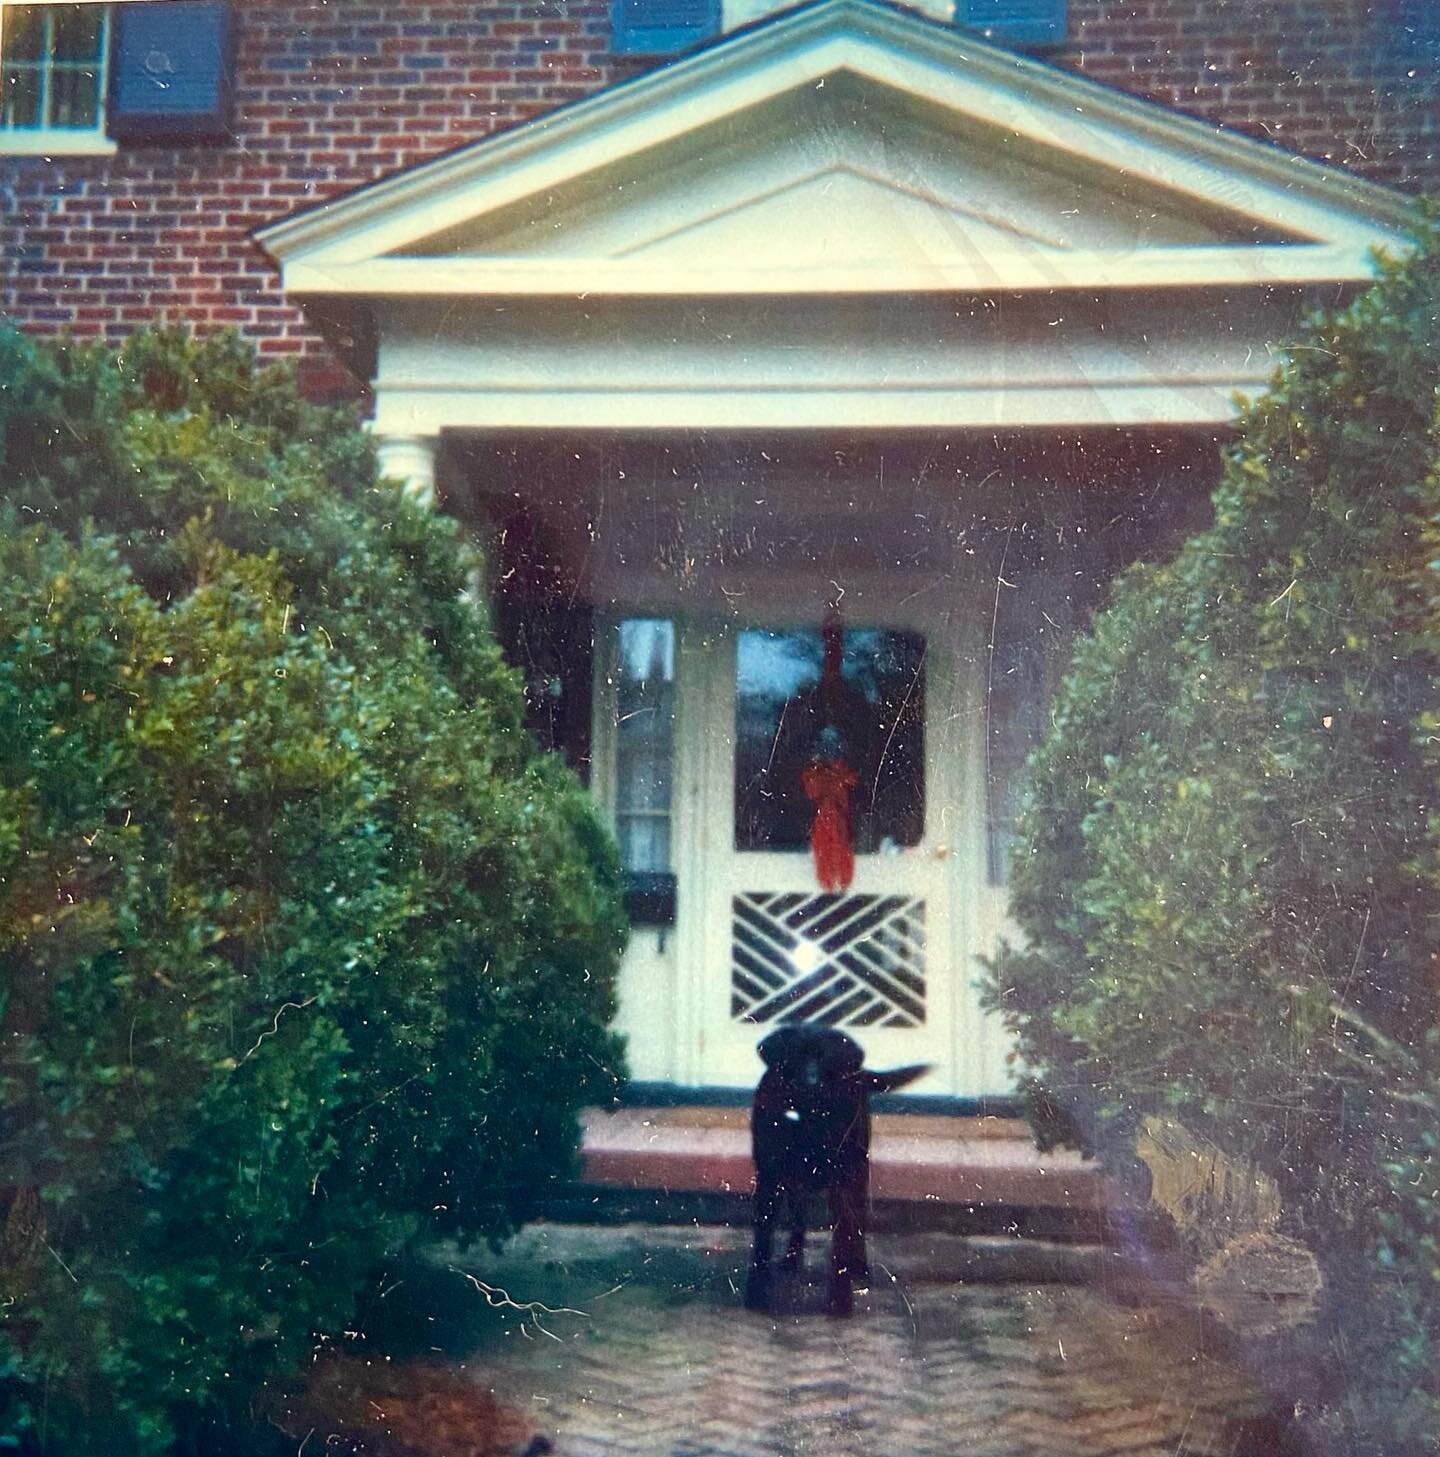 I just came across this photo of my first lab, Bear, taken at my mother&rsquo;s house,  Christmas, 1985.  You really never stop missing them, do you?